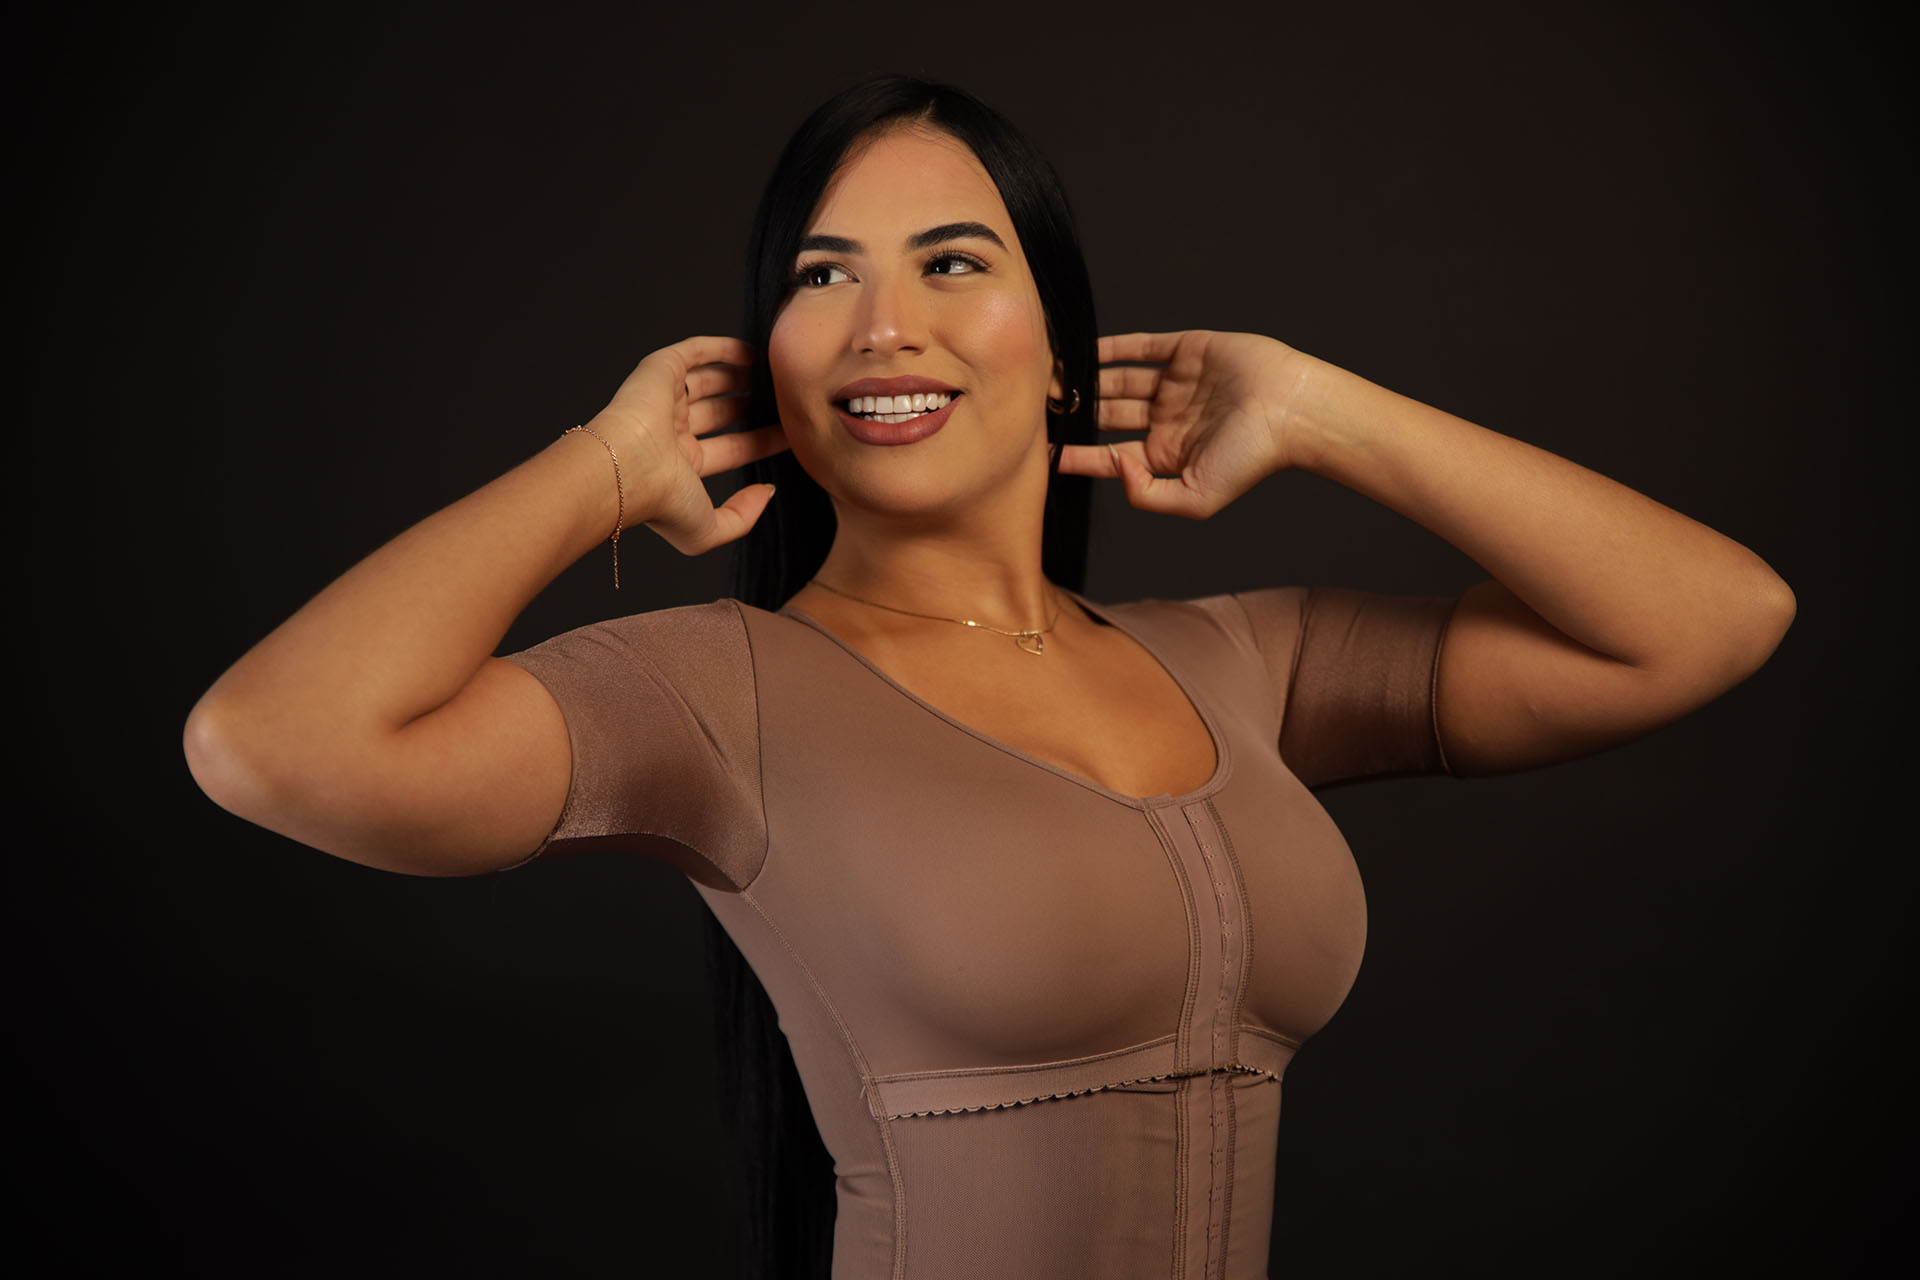 Ogee Recovery on Instagram: The Ogee faja with bra provides confortable  support through the chest, arms and holds the breast firmly in place  without adding too much pressure. #ogee #ogeefaja #miami #compression #